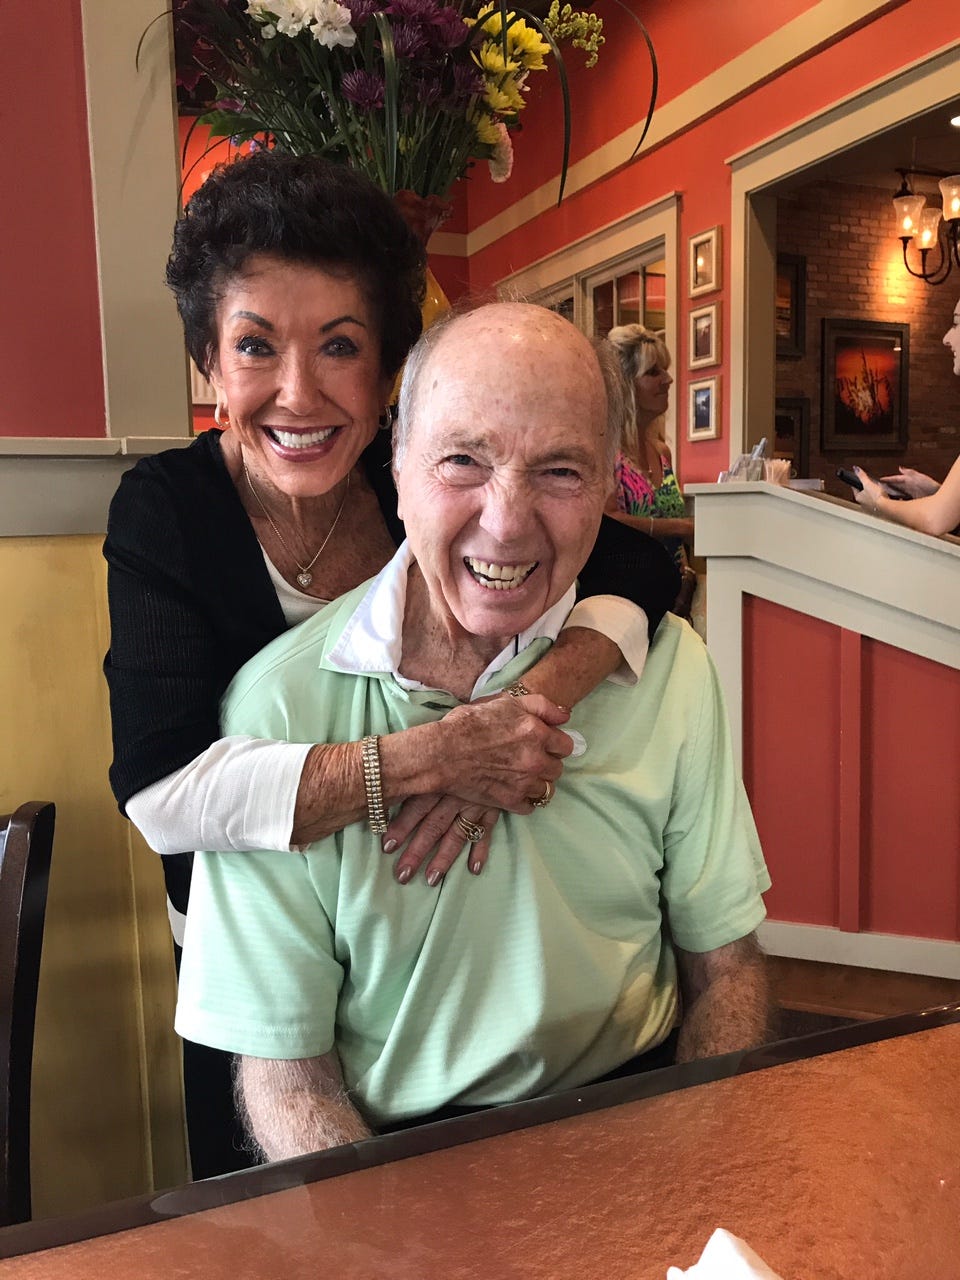 Bart Starr returning to Lambeau Field for Packers-Saints game Sunday